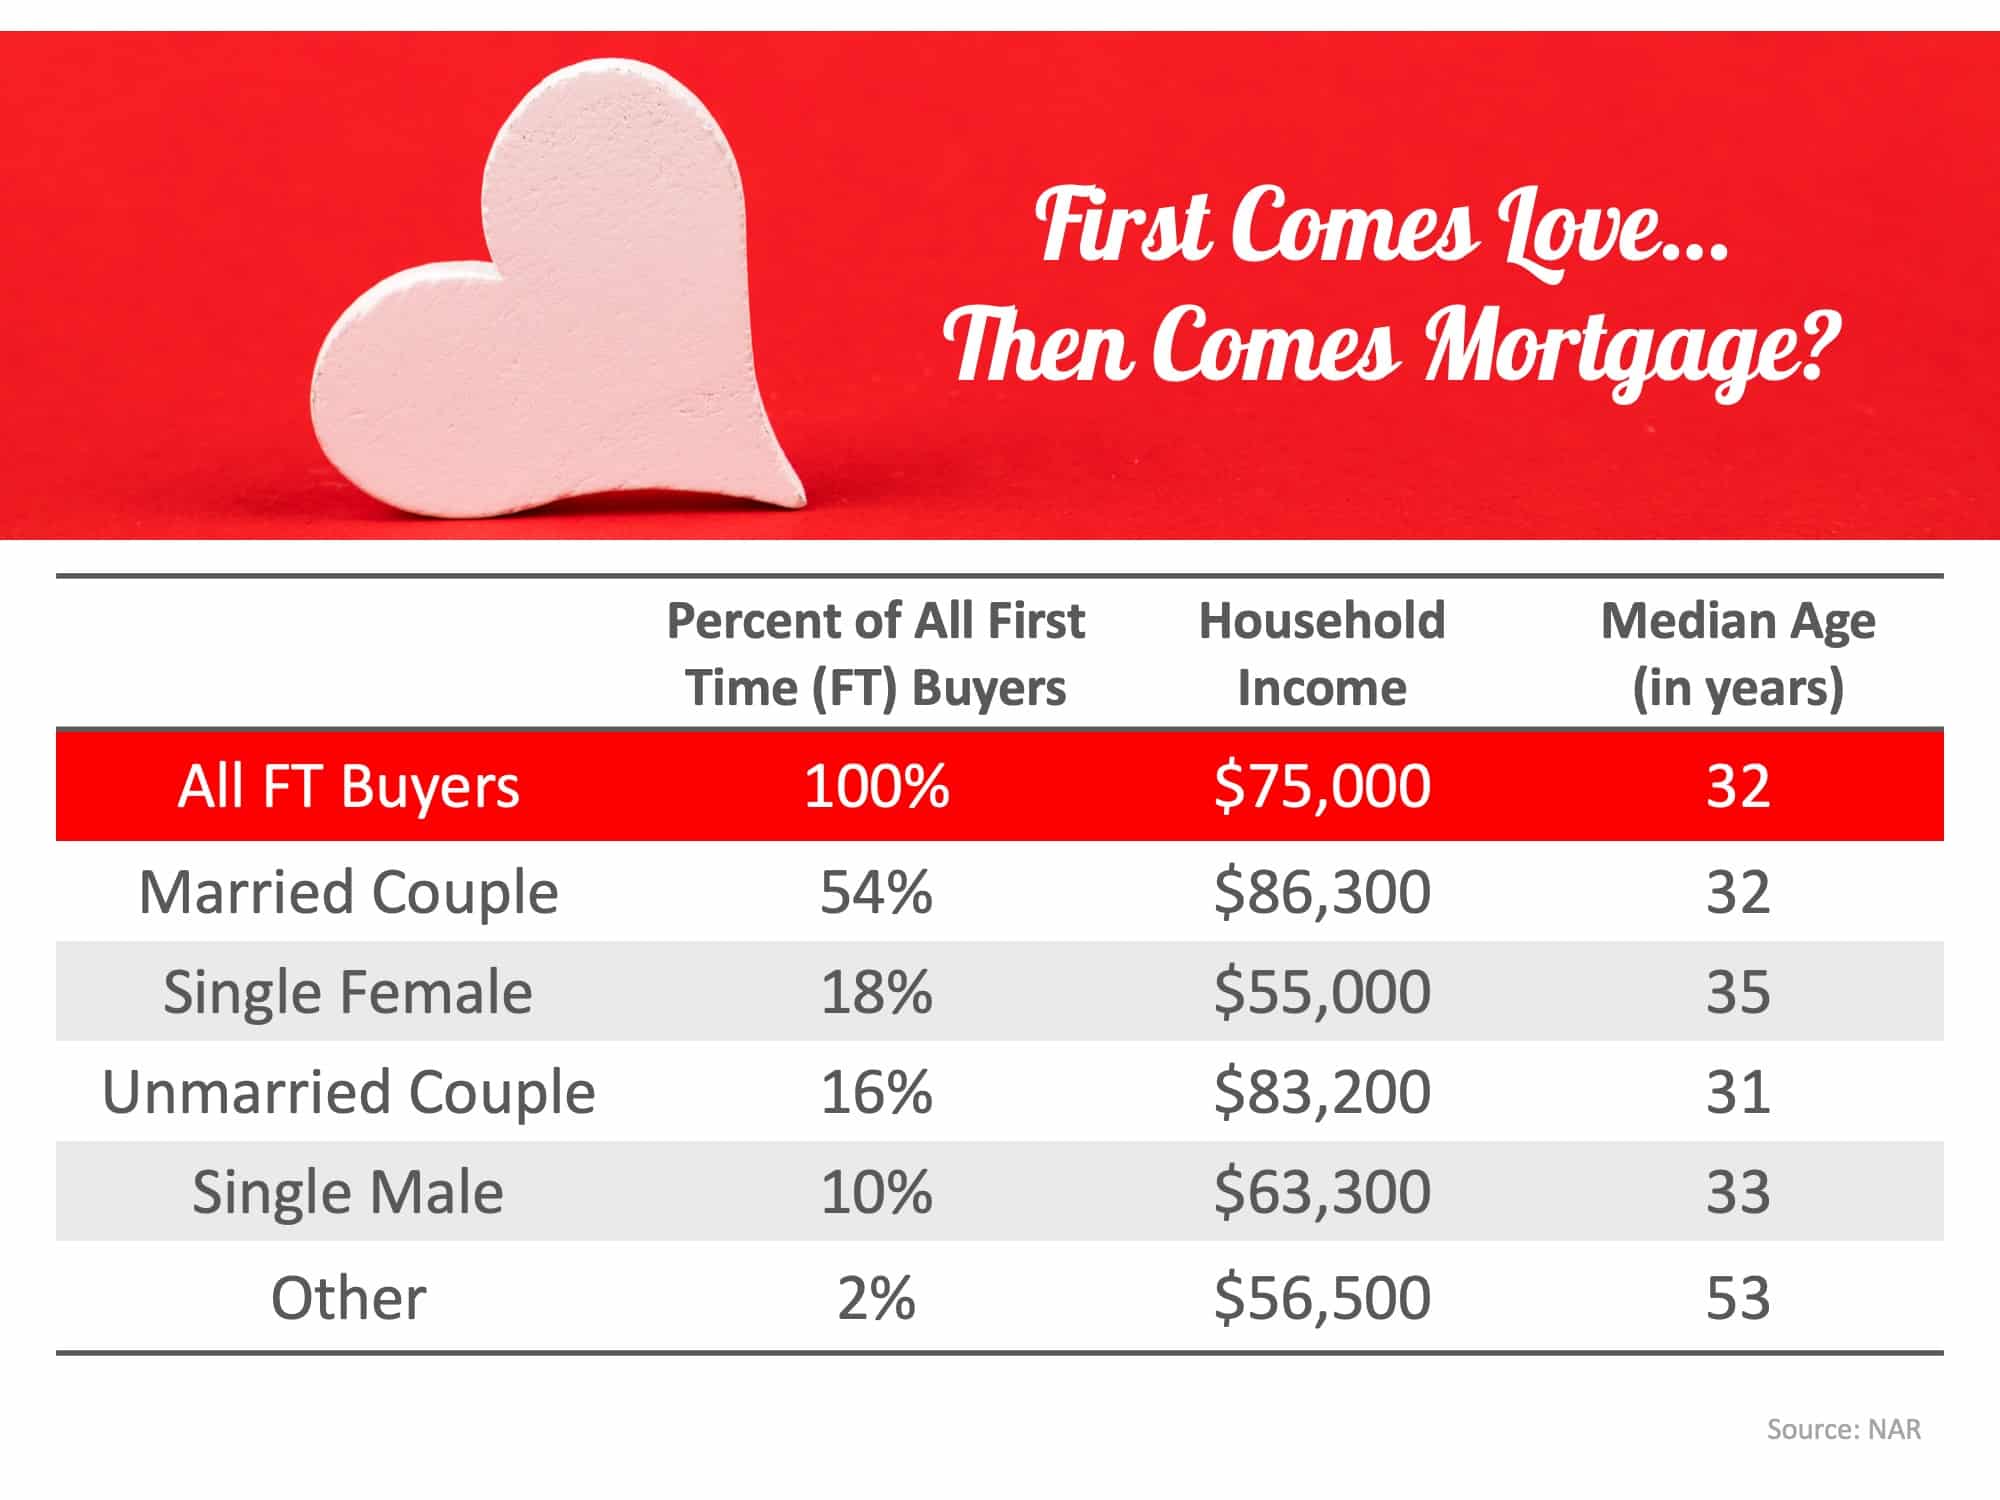 First Comes Love… Then Comes Mortgage? Couples Lead the Way 